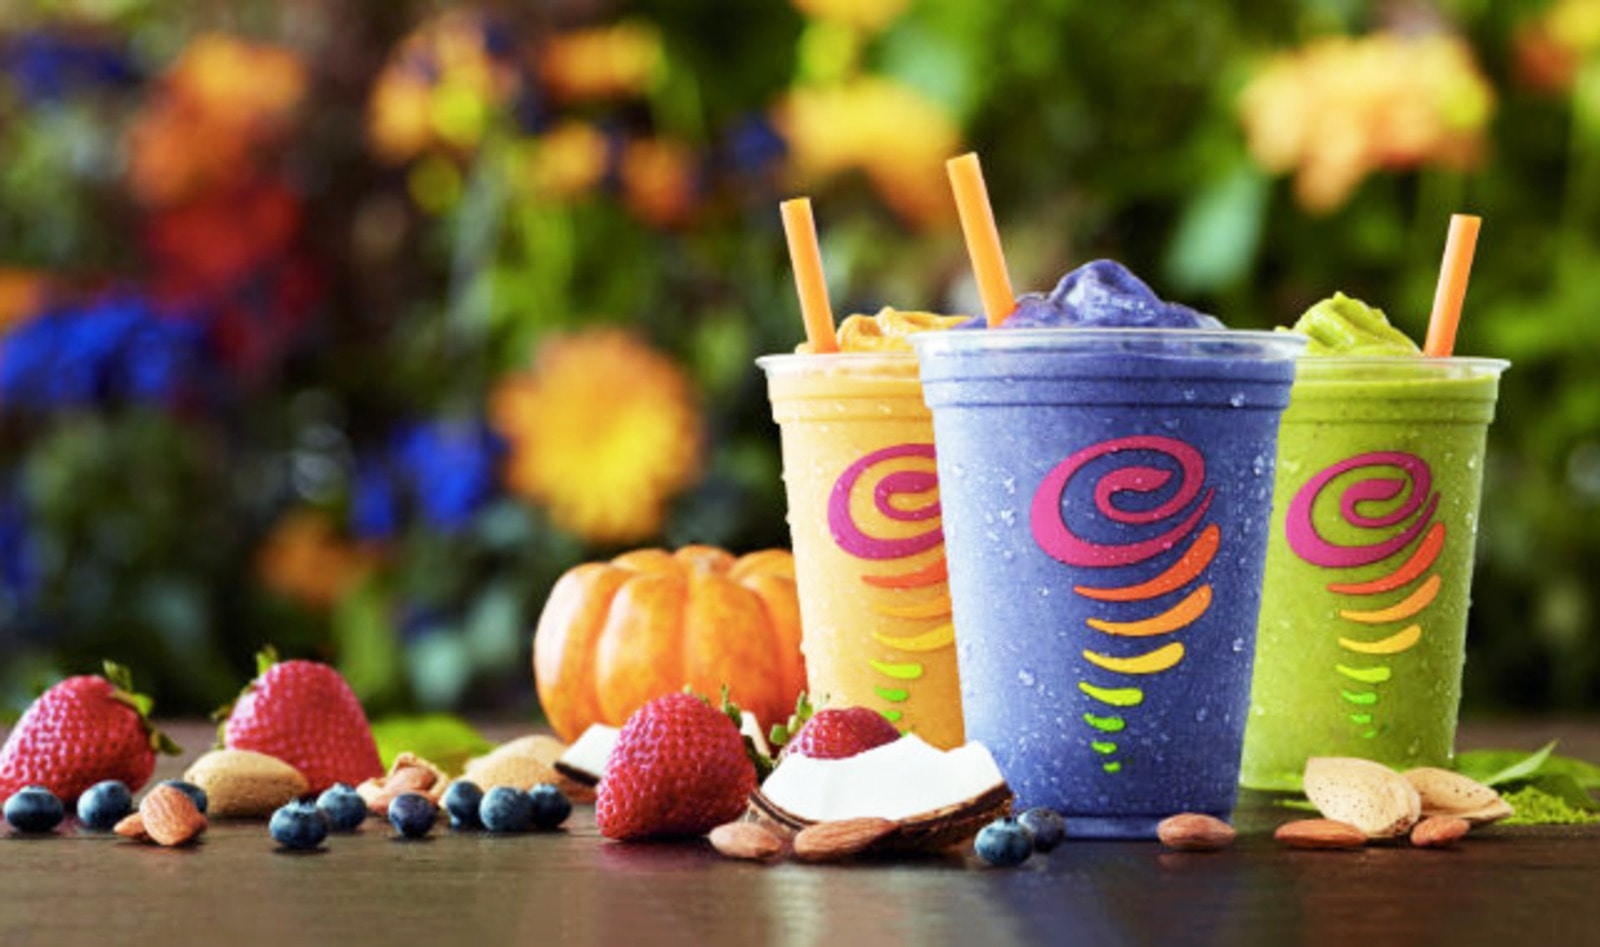 Jamba Juice to Offer More Vegan Protein and Milk Options